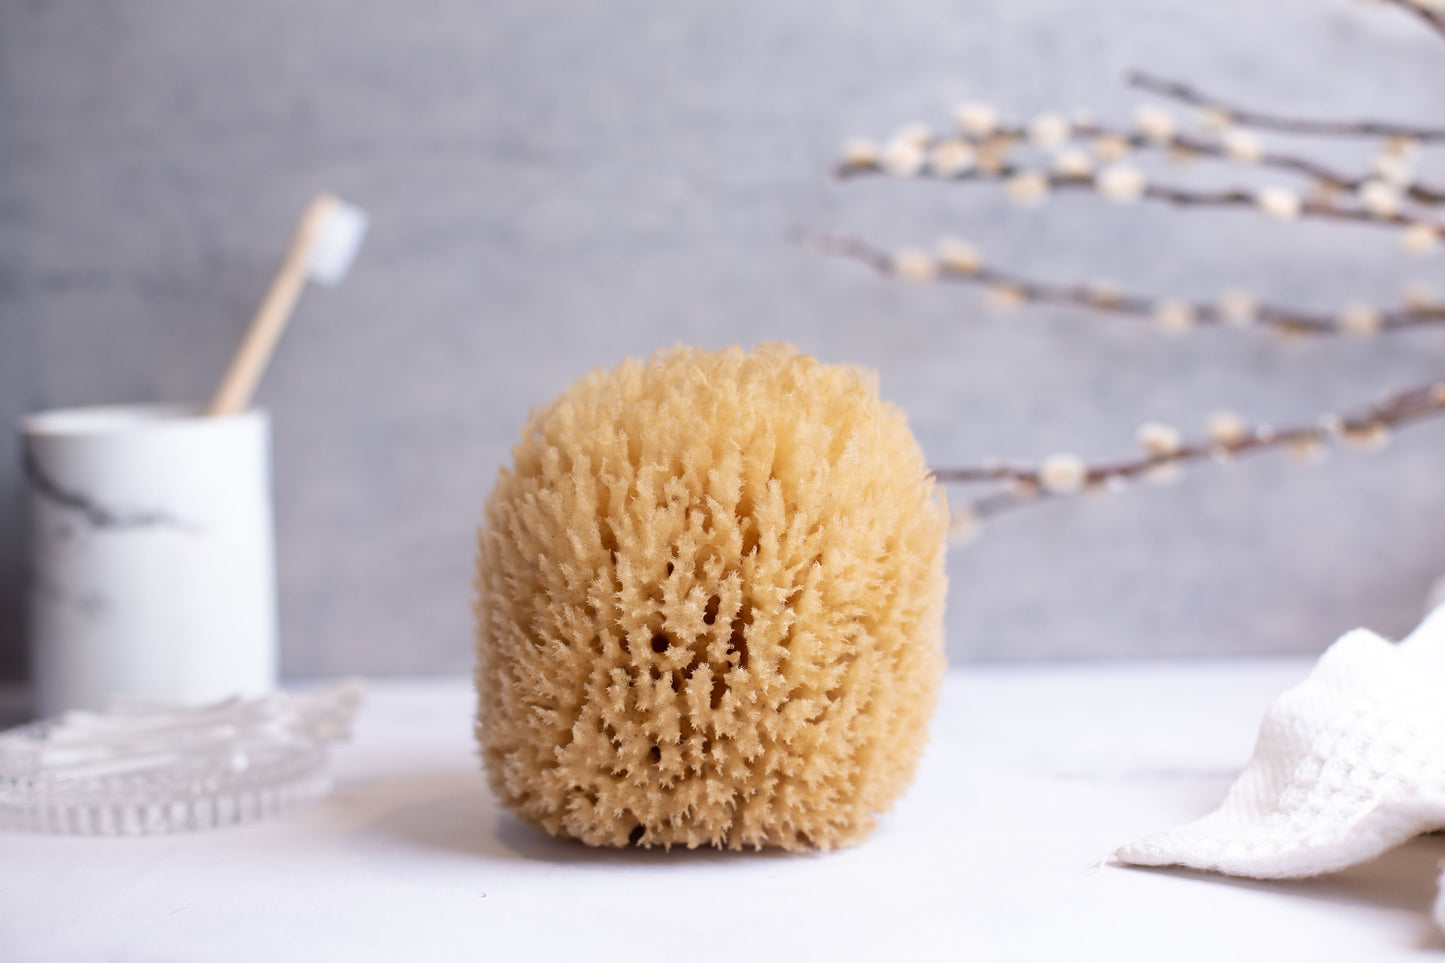 Naroa natural sponge on a bathroom table with plant, towel and toothbrush in the background